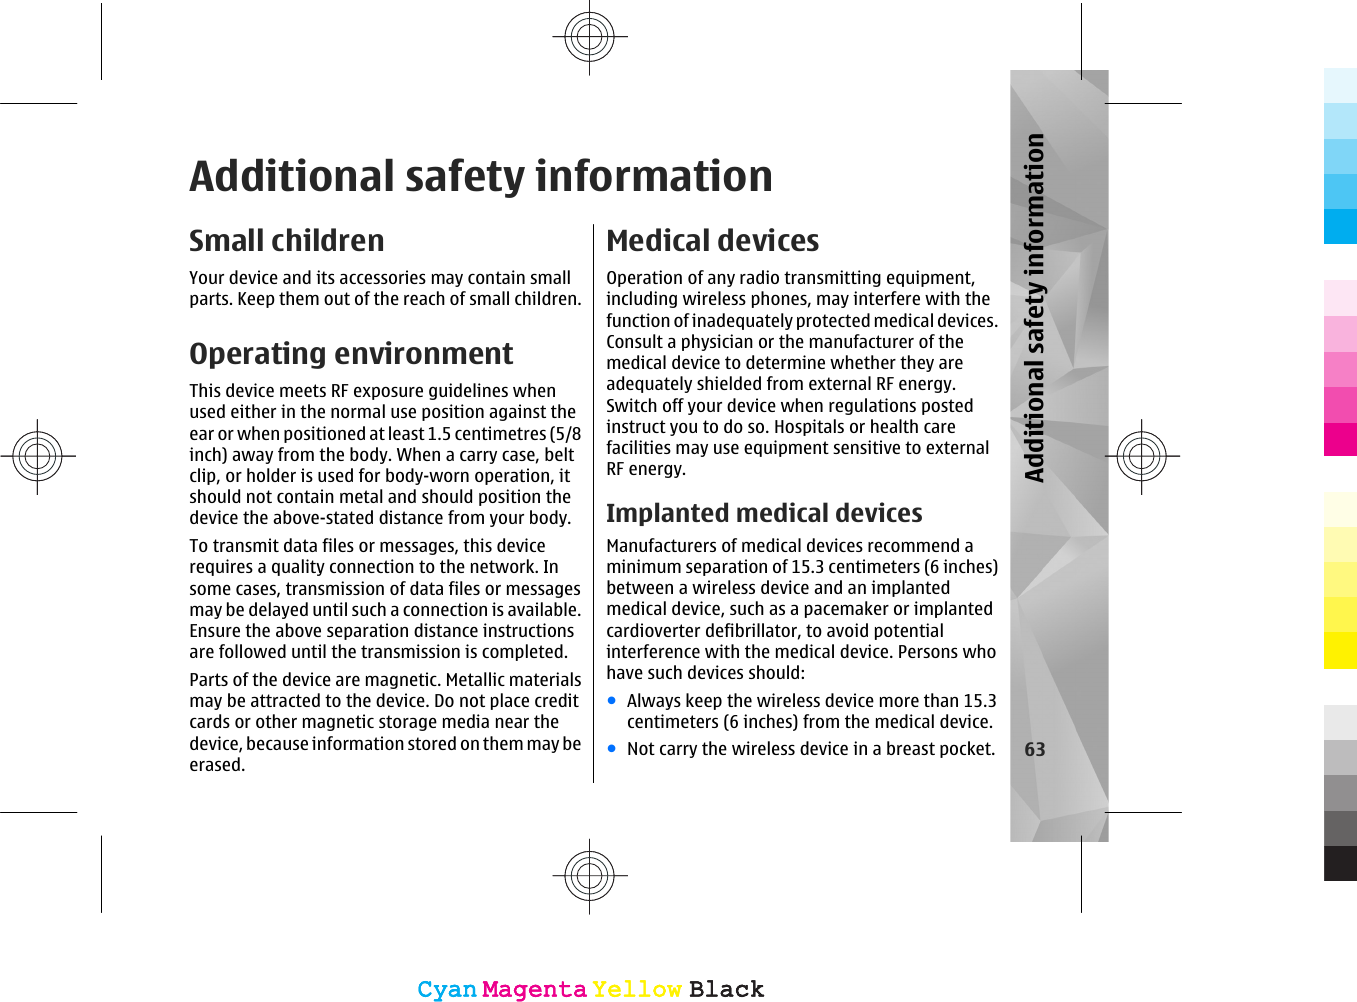 Additional safety informationSmall childrenYour device and its accessories may contain smallparts. Keep them out of the reach of small children.Operating environmentThis device meets RF exposure guidelines whenused either in the normal use position against theear or when positioned at least 1.5 centimetres (5/8inch) away from the body. When a carry case, beltclip, or holder is used for body-worn operation, itshould not contain metal and should position thedevice the above-stated distance from your body.To transmit data files or messages, this devicerequires a quality connection to the network. Insome cases, transmission of data files or messagesmay be delayed until such a connection is available.Ensure the above separation distance instructionsare followed until the transmission is completed.Parts of the device are magnetic. Metallic materialsmay be attracted to the device. Do not place creditcards or other magnetic storage media near thedevice, because information stored on them may beerased.Medical devicesOperation of any radio transmitting equipment,including wireless phones, may interfere with thefunction of inadequately protected medical devices.Consult a physician or the manufacturer of themedical device to determine whether they areadequately shielded from external RF energy.Switch off your device when regulations postedinstruct you to do so. Hospitals or health carefacilities may use equipment sensitive to externalRF energy.Implanted medical devicesManufacturers of medical devices recommend aminimum separation of 15.3 centimeters (6 inches)between a wireless device and an implantedmedical device, such as a pacemaker or implantedcardioverter defibrillator, to avoid potentialinterference with the medical device. Persons whohave such devices should:●Always keep the wireless device more than 15.3centimeters (6 inches) from the medical device.●Not carry the wireless device in a breast pocket. 63Additional safety informationCyanCyanMagentaMagentaYellowYellowBlackBlackCyanCyanMagentaMagentaYellowYellowBlackBlack